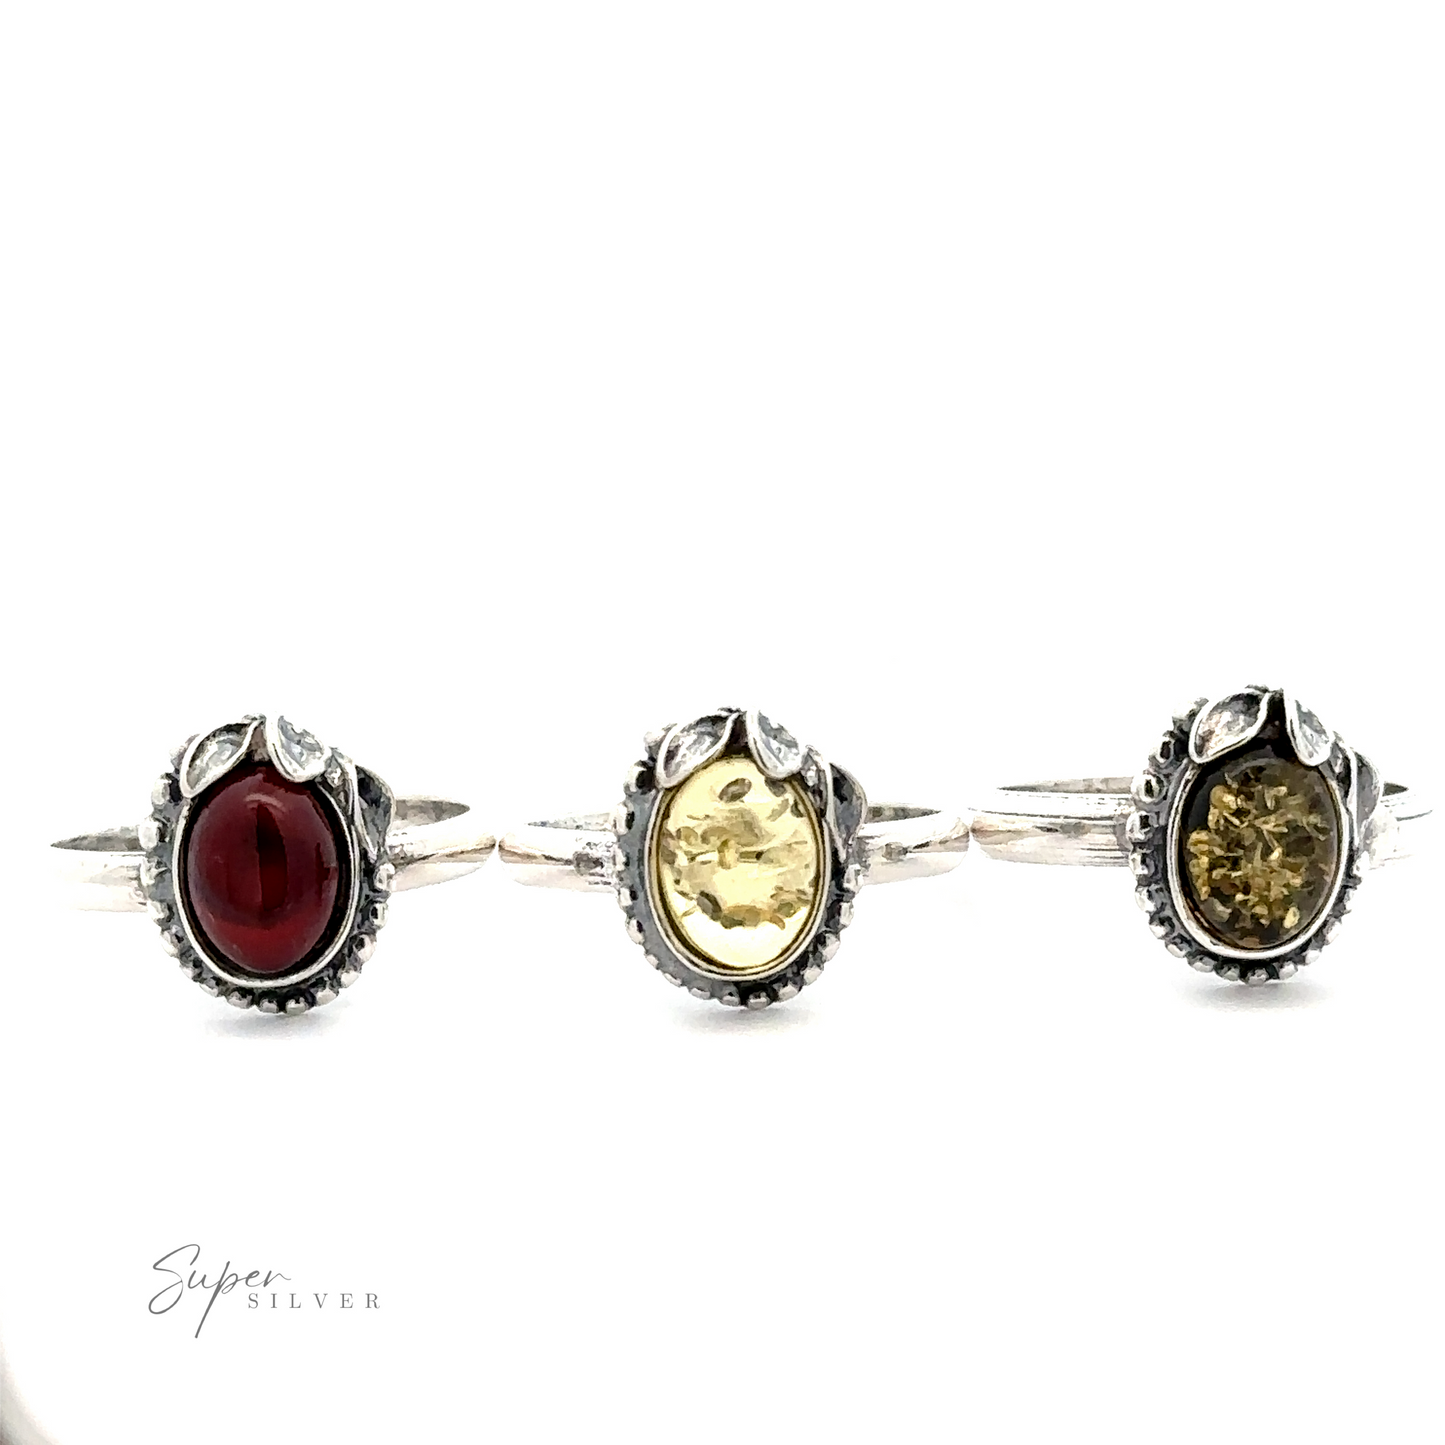 
                  
                    Three silver rings with ornate settings exude vintage elegance; the left ring has a red gemstone, the middle features an Amber Ring with Beaded Border and Peace Lily Details, and the right showcases another yellow gemstone. "Super Silver" text in the bottom left.
                  
                